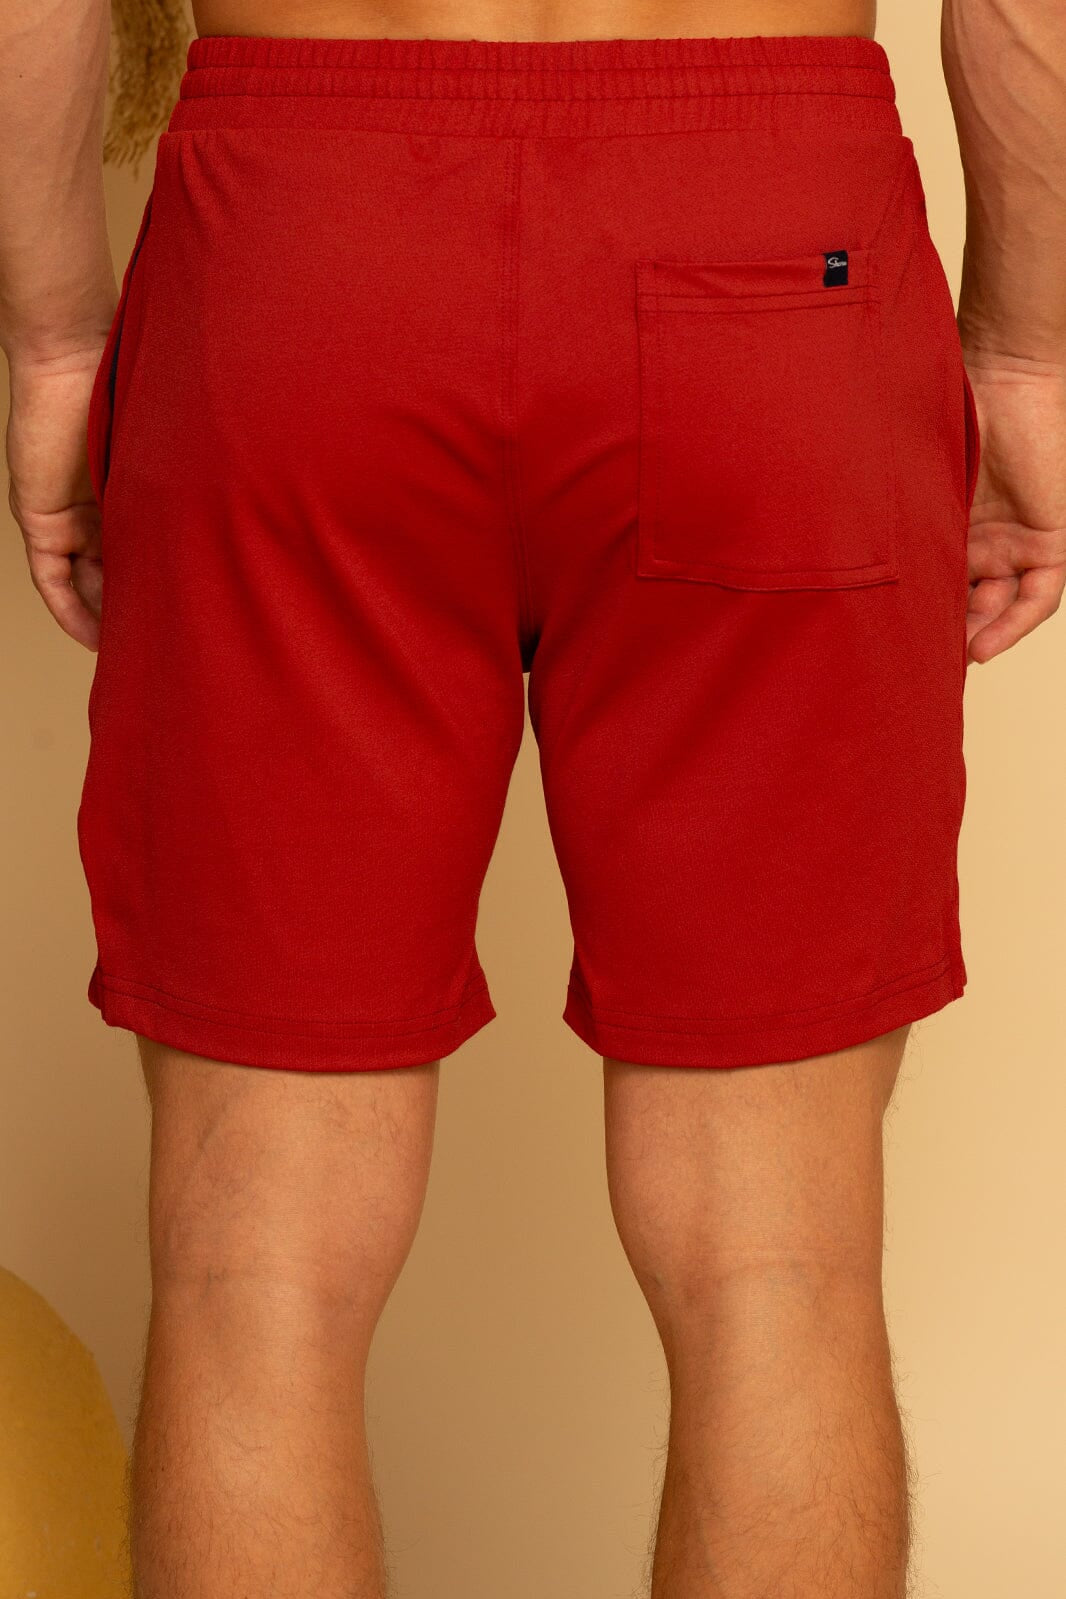 TIDEWATER LOUNGE BOARDSHORT - RED - S